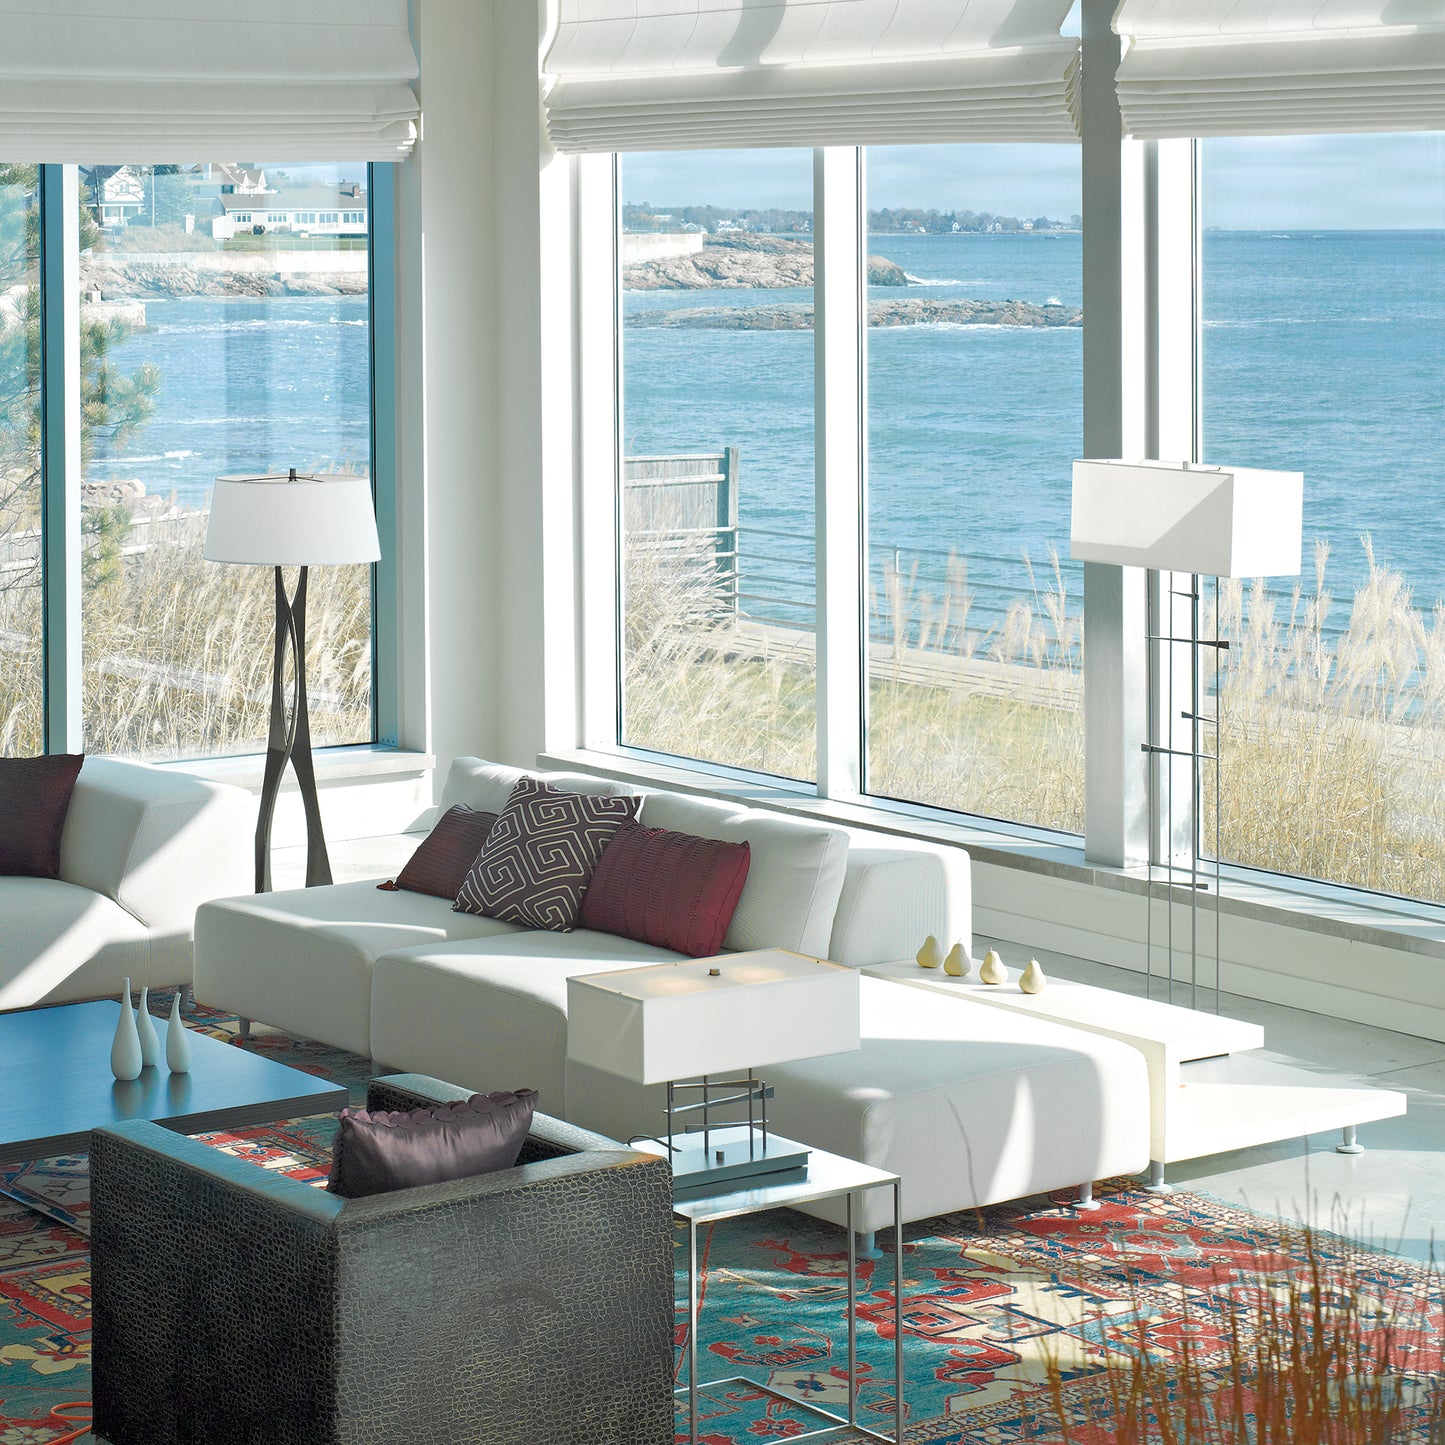 A living room with a Hubbardton Forge Moreau Floor Lamp and a view of the ocean.